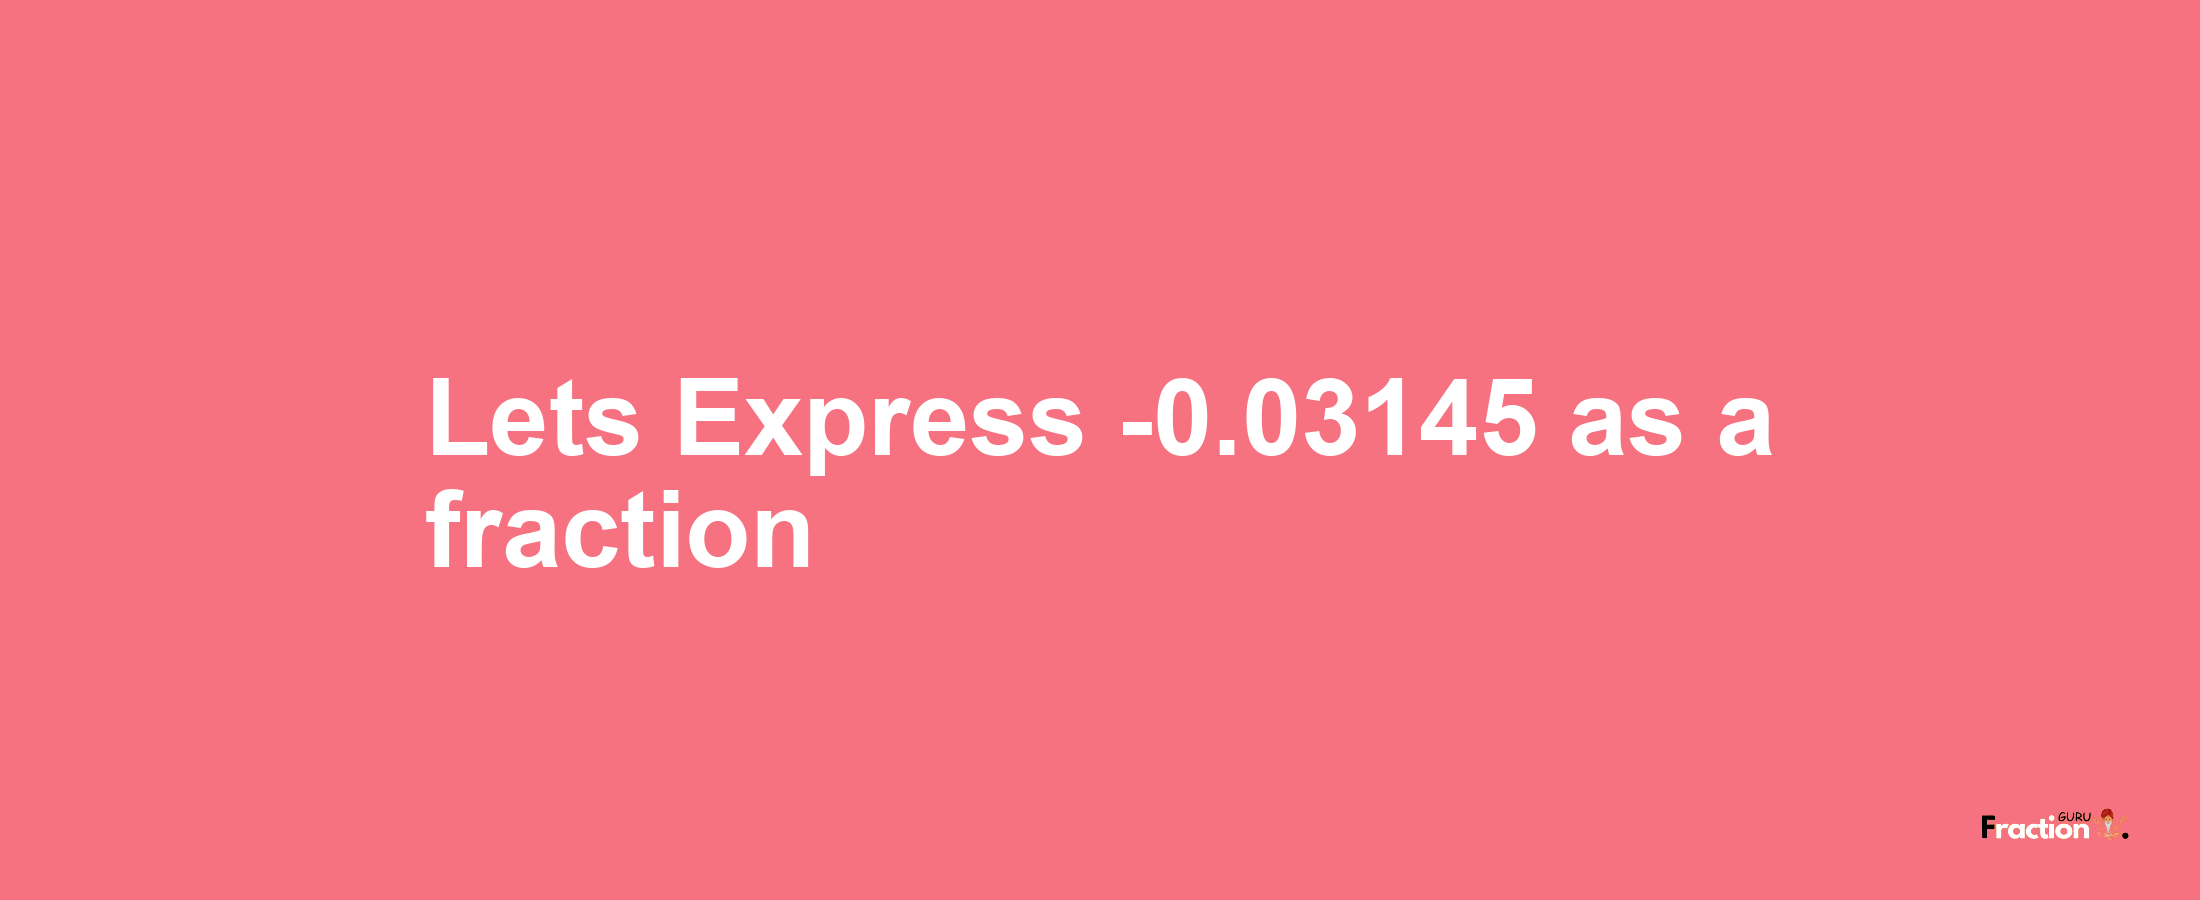 Lets Express -0.03145 as afraction